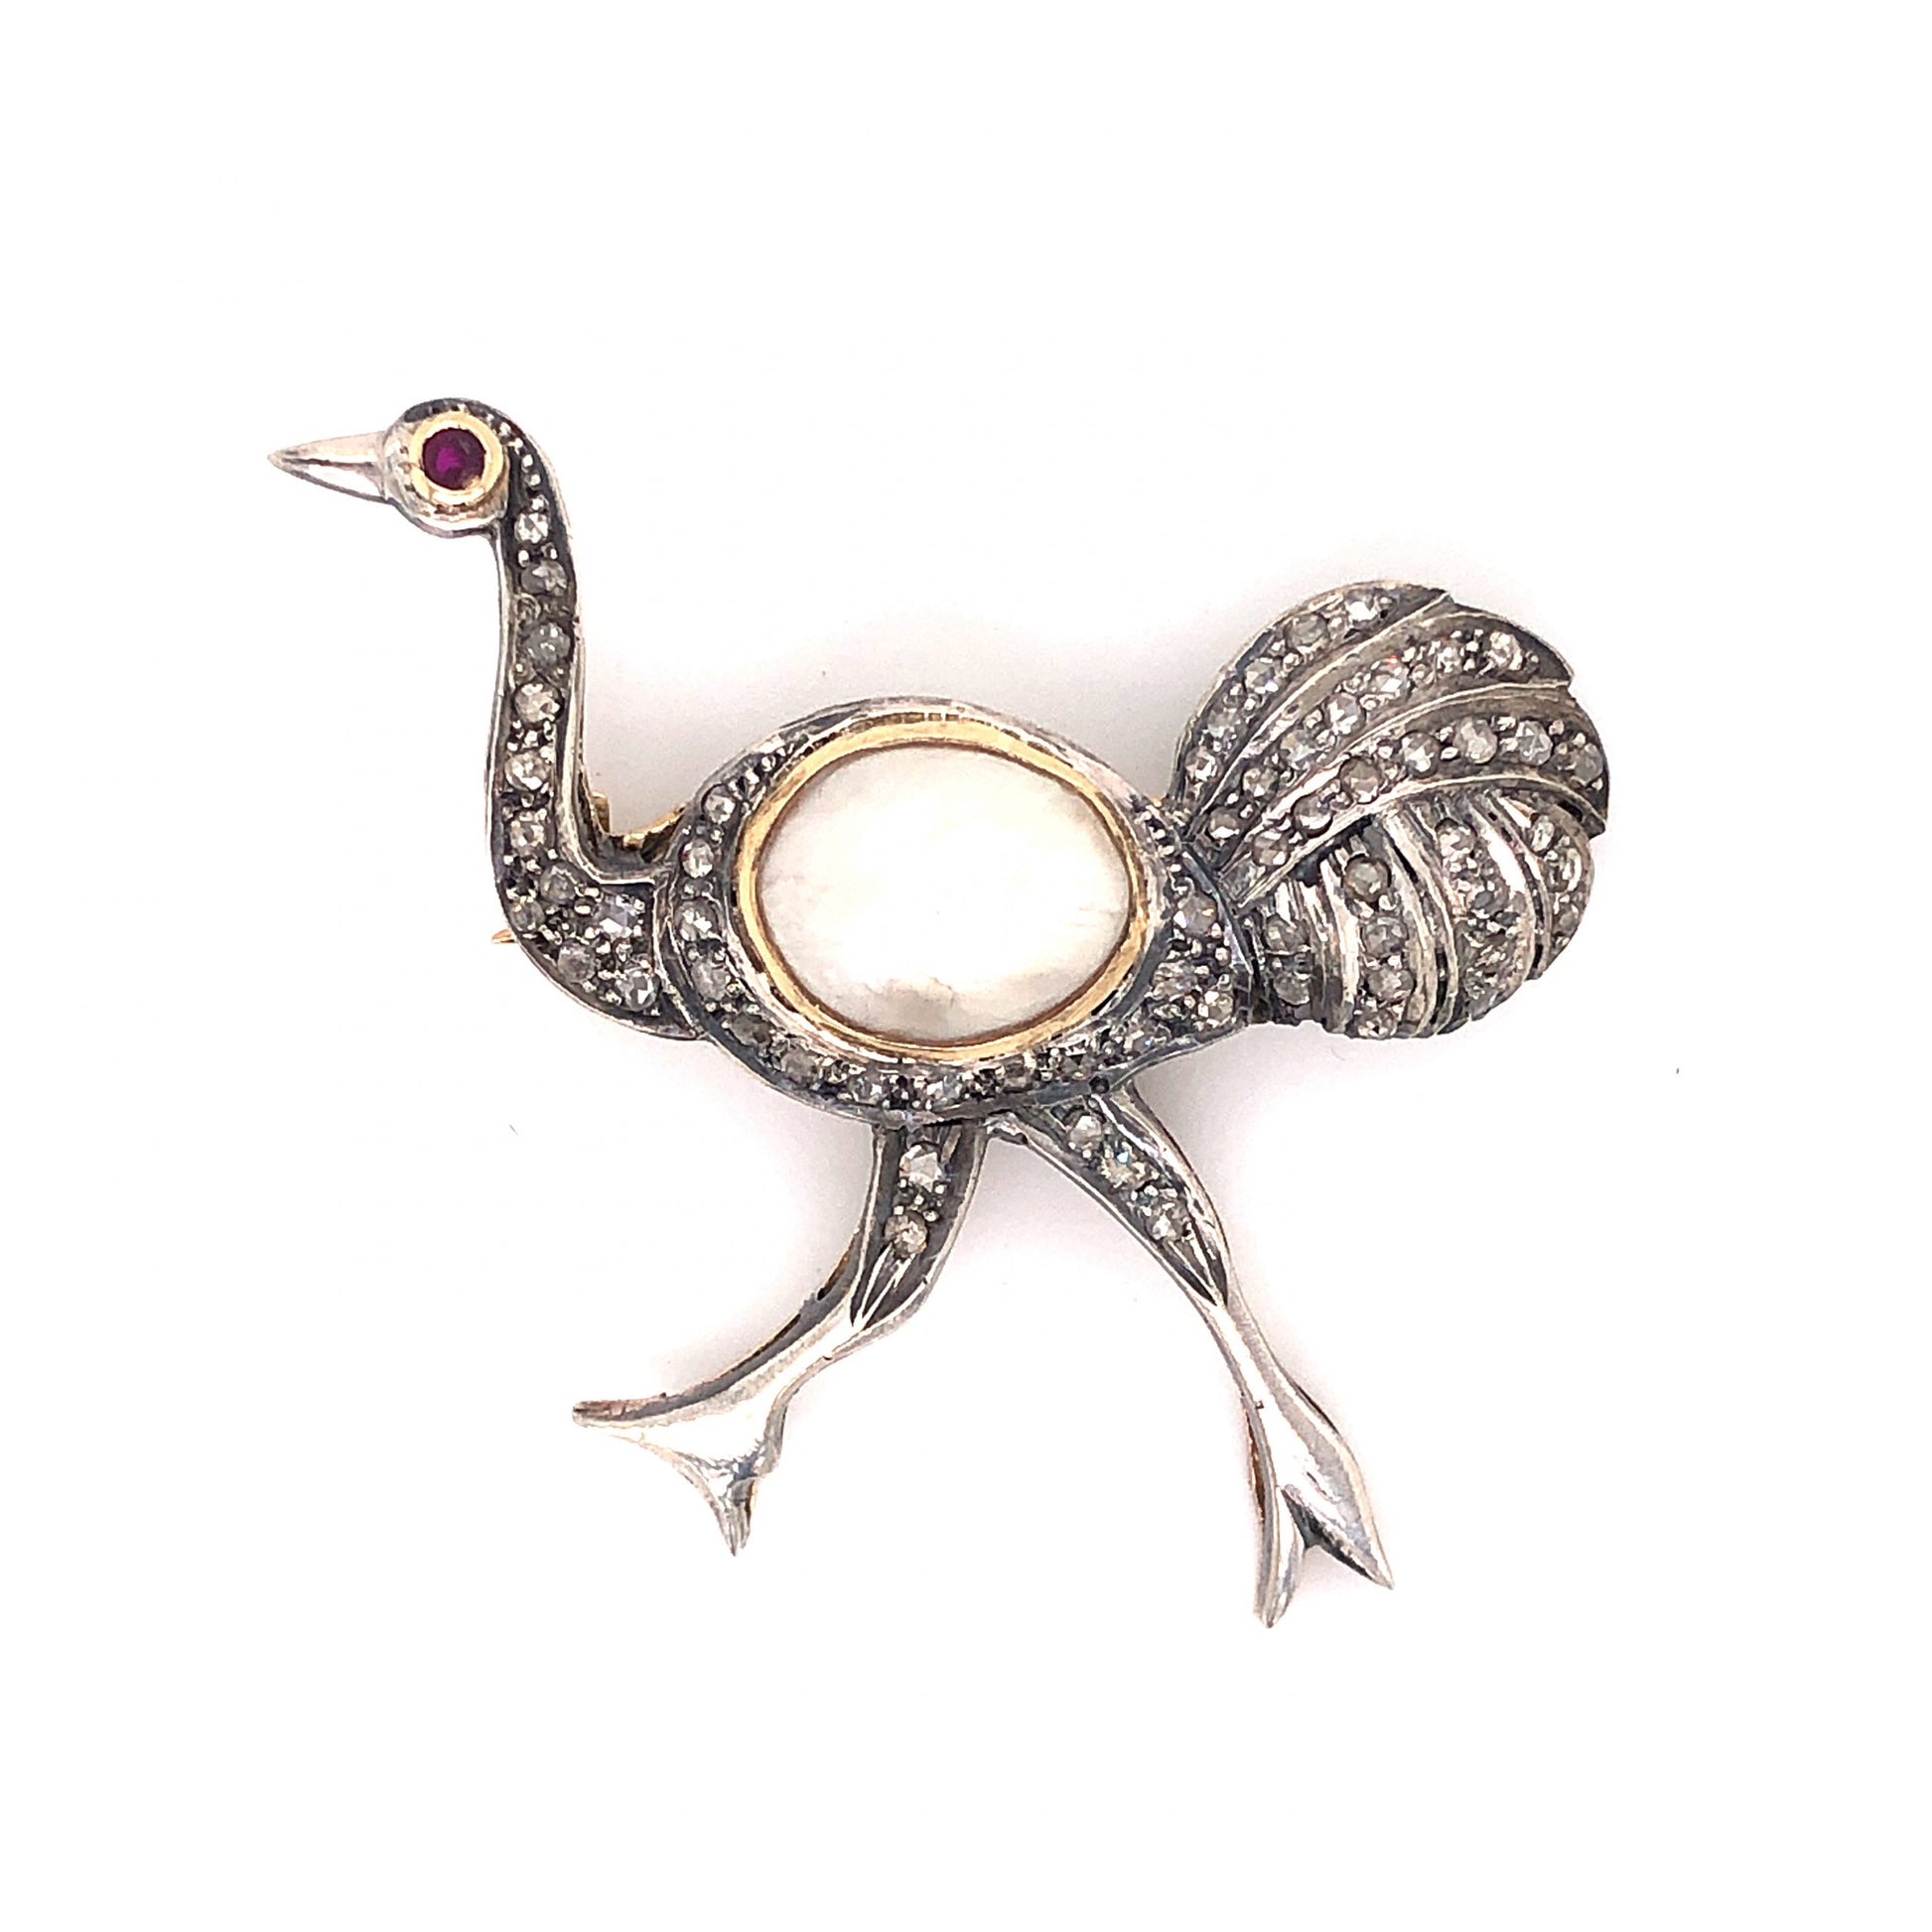 Antique Inspired Ostrich Brooch in Sterling Silver and 14k GoldComposition: 14 Karat Yellow Gold/Sterling Silver Total Diamond Weight: 1.24ct Total Gram Weight: 10.4 g